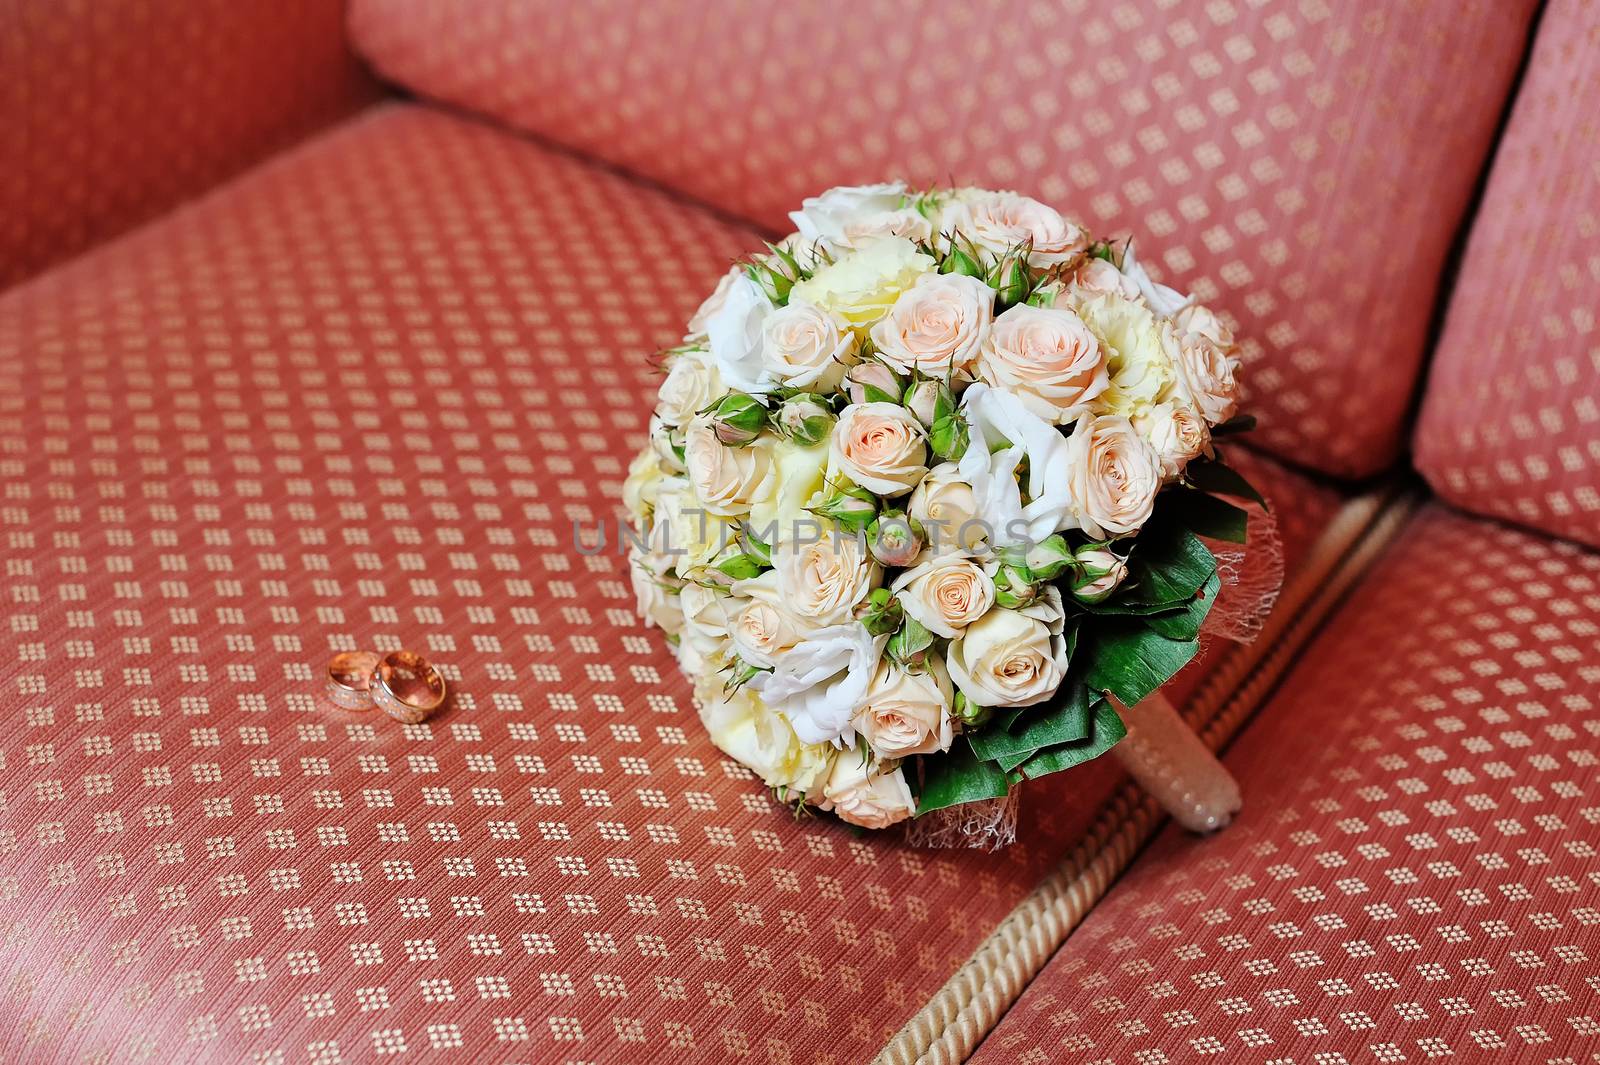 Pair of wedding rings and wedding bouquet on sofa by timonko